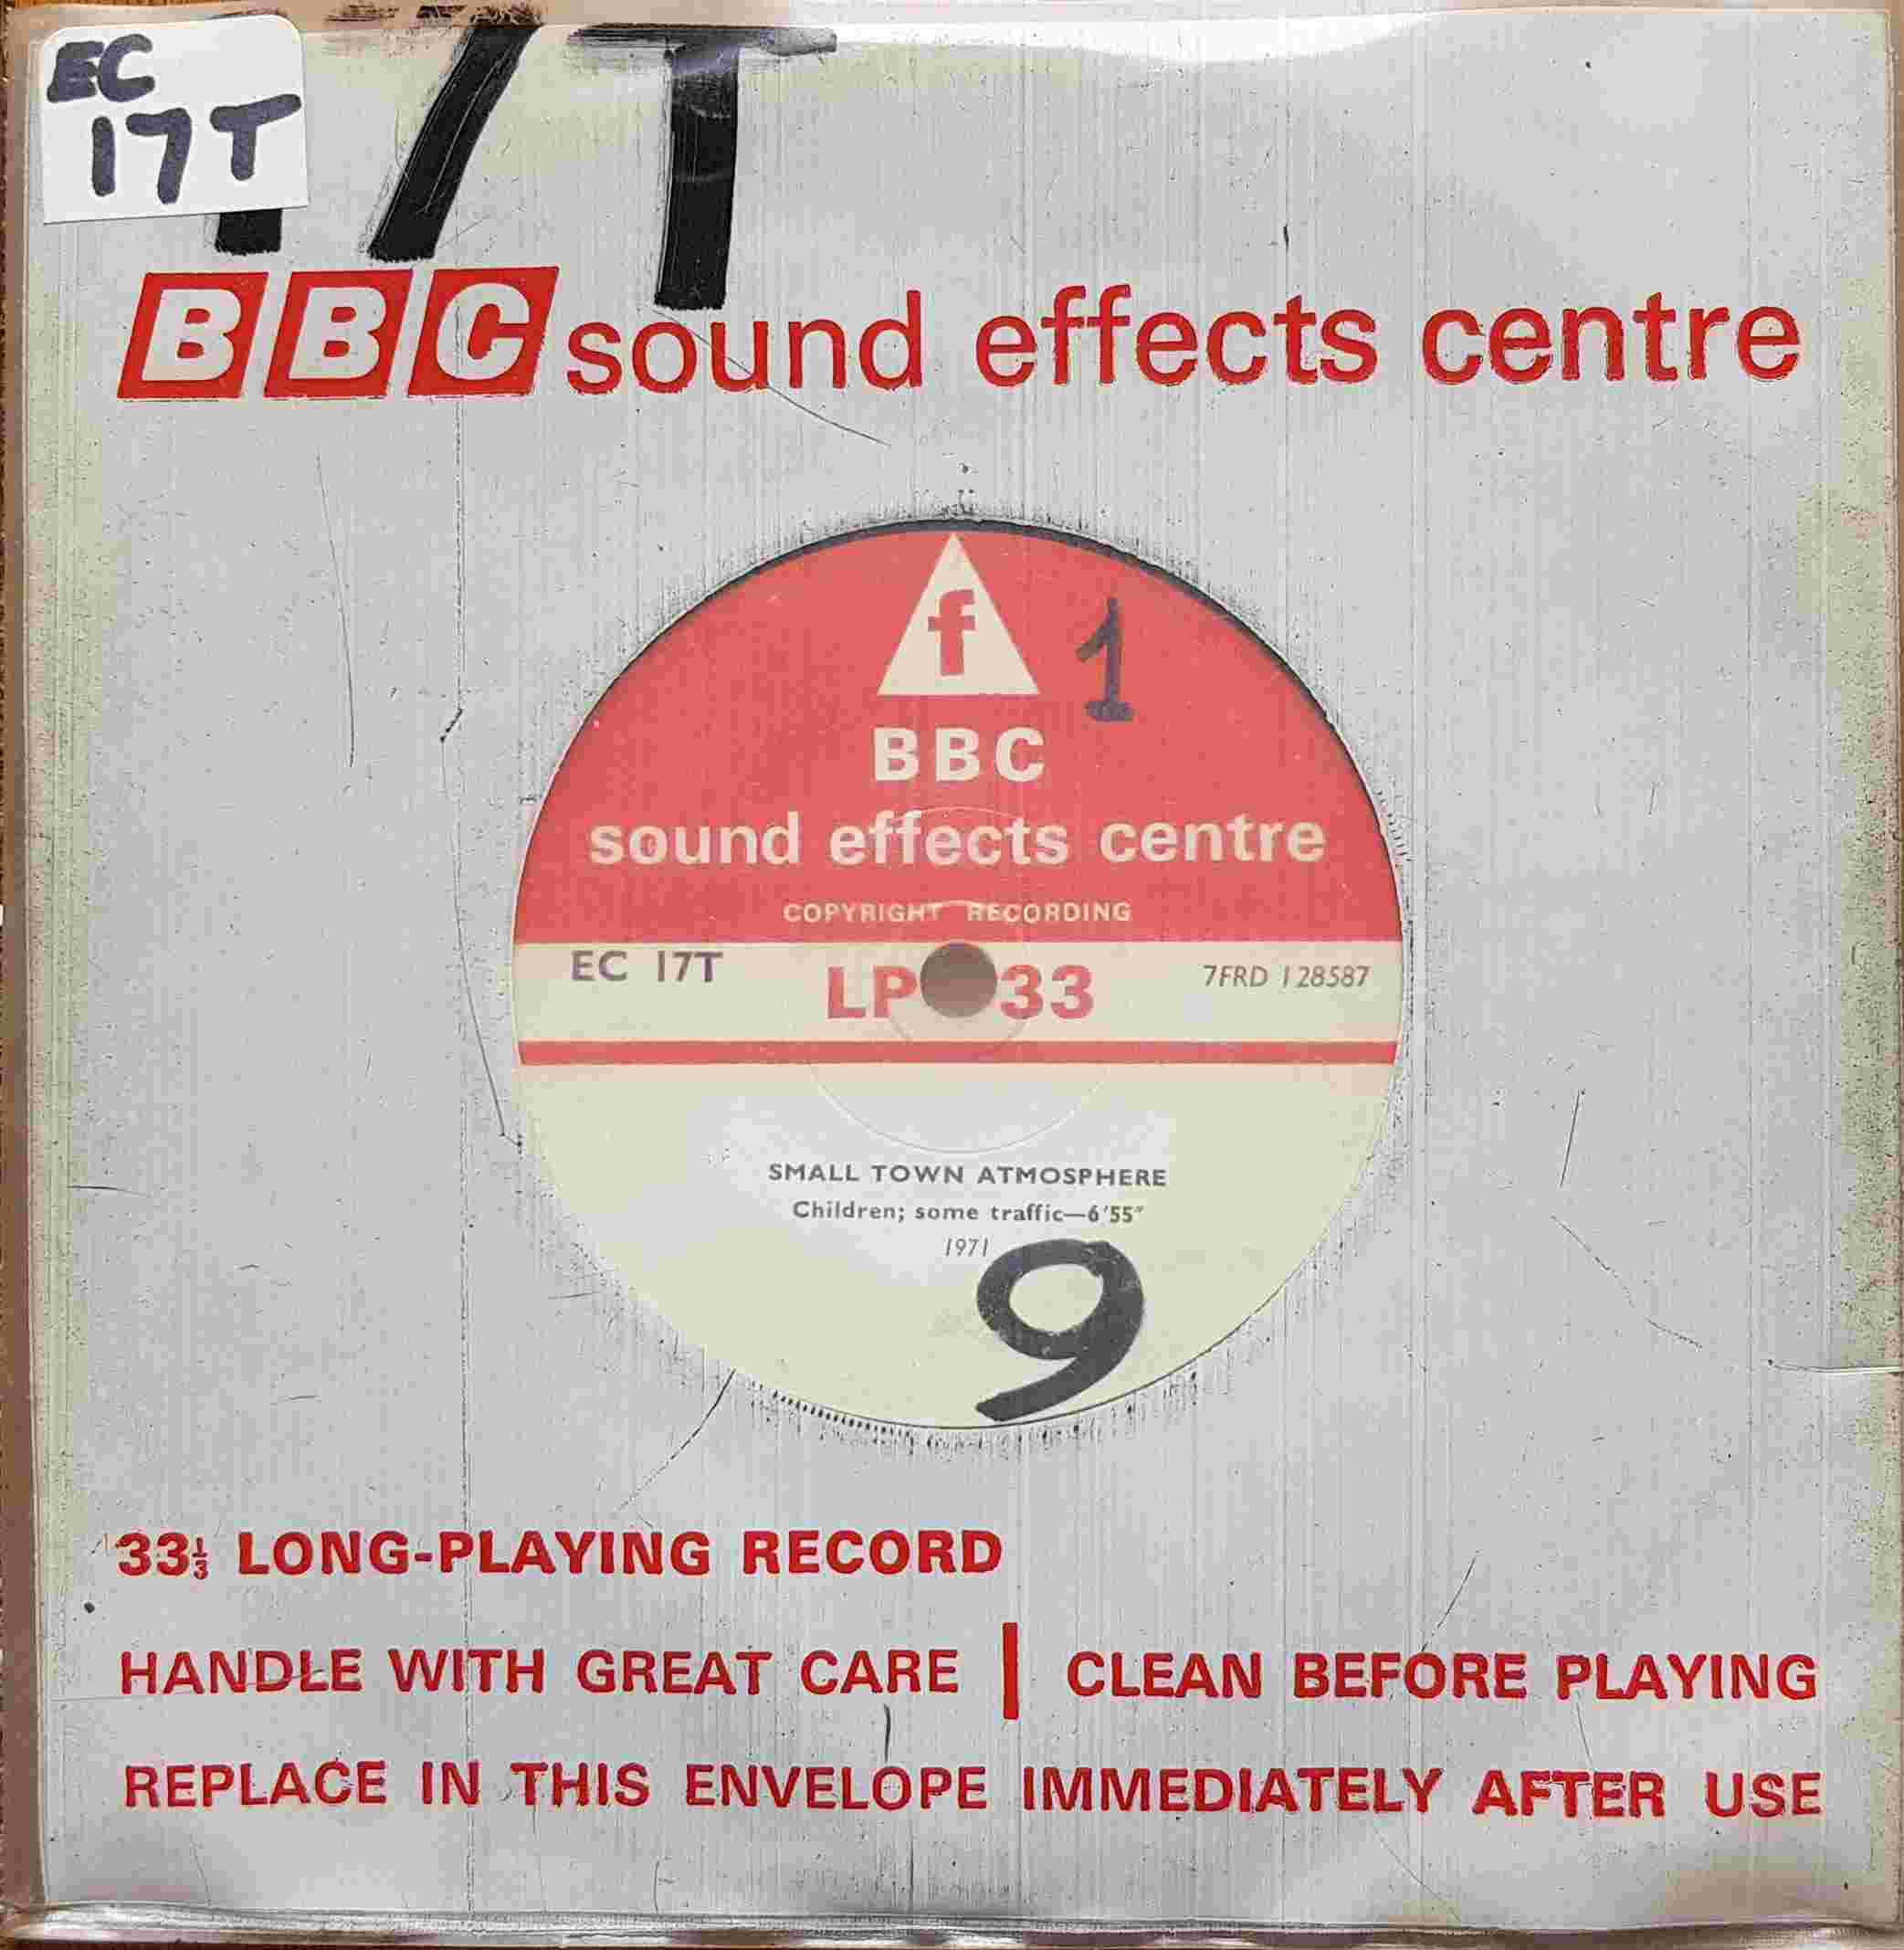 Picture of EC 17T Small town atmosphere / Village & playground atmospheres by artist Not registered from the BBC singles - Records and Tapes library